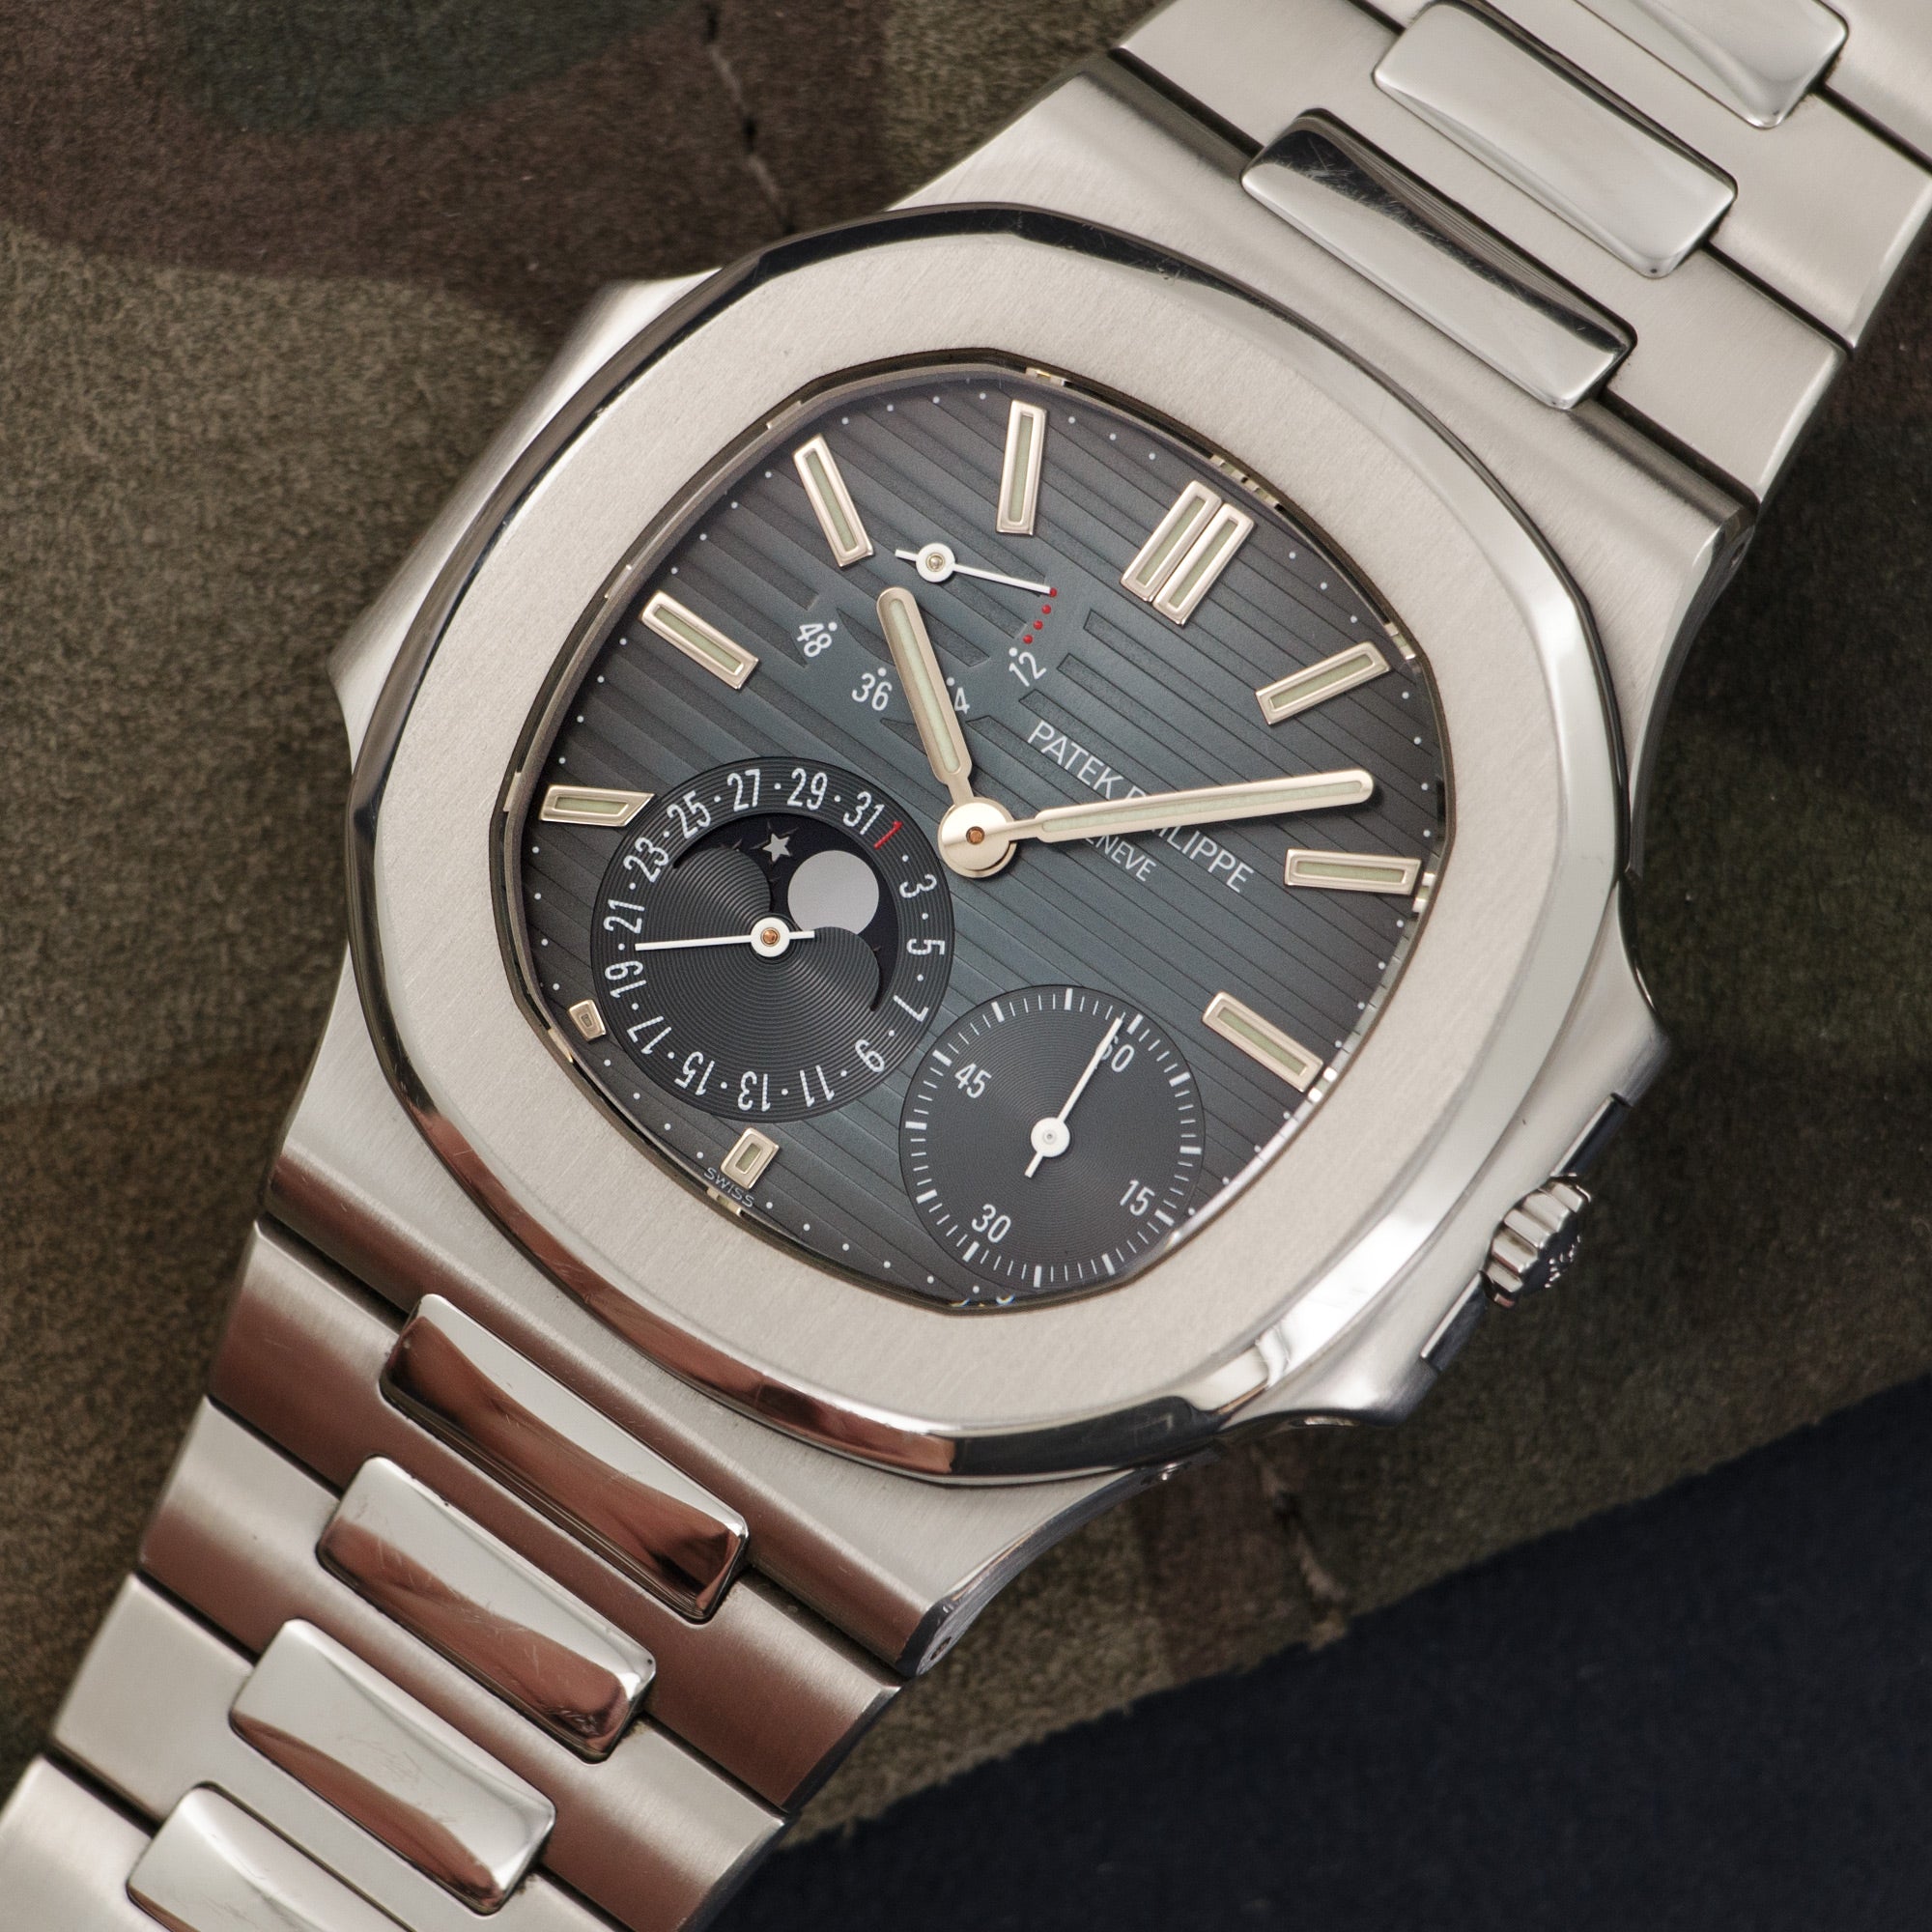 Patek Philippe - Patek Philippe Steel Nautilus Moonphase Watch Ref. 3712 with Original Box and Papers - The Keystone Watches